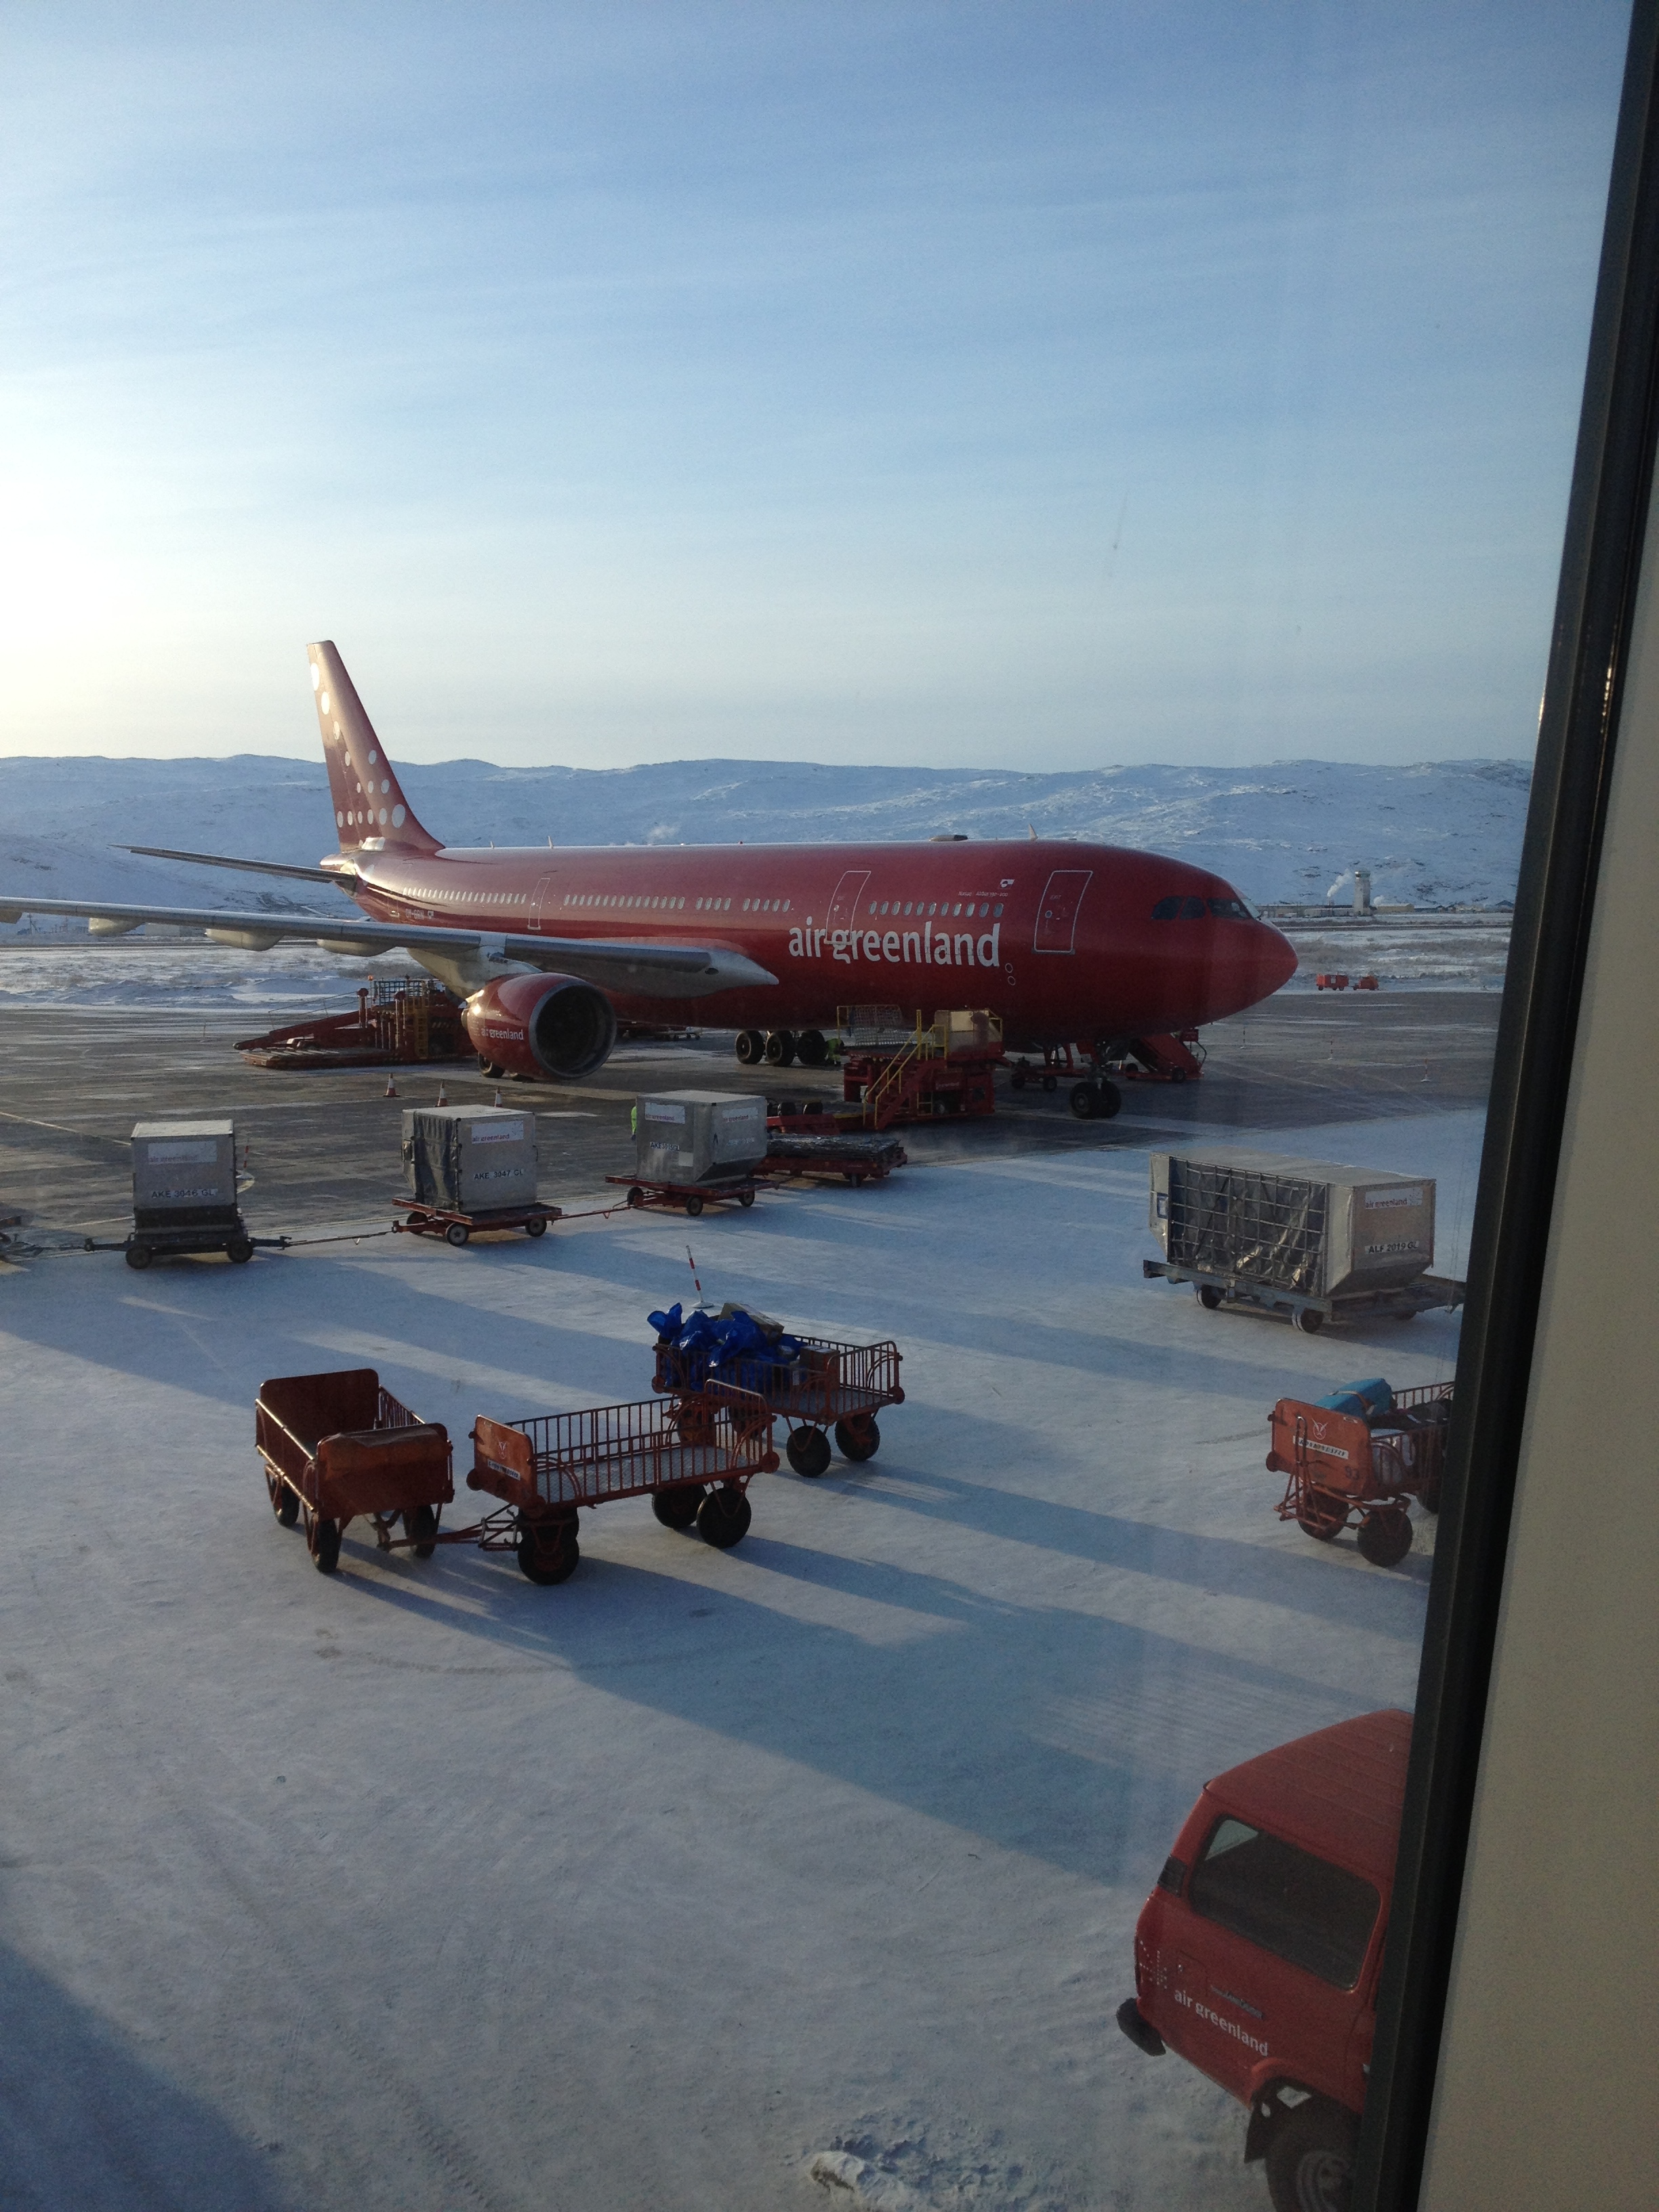 Air Greenland’s single jet airliner (an Airbus A330) on the tarmac at Kangerlussuaq airport.